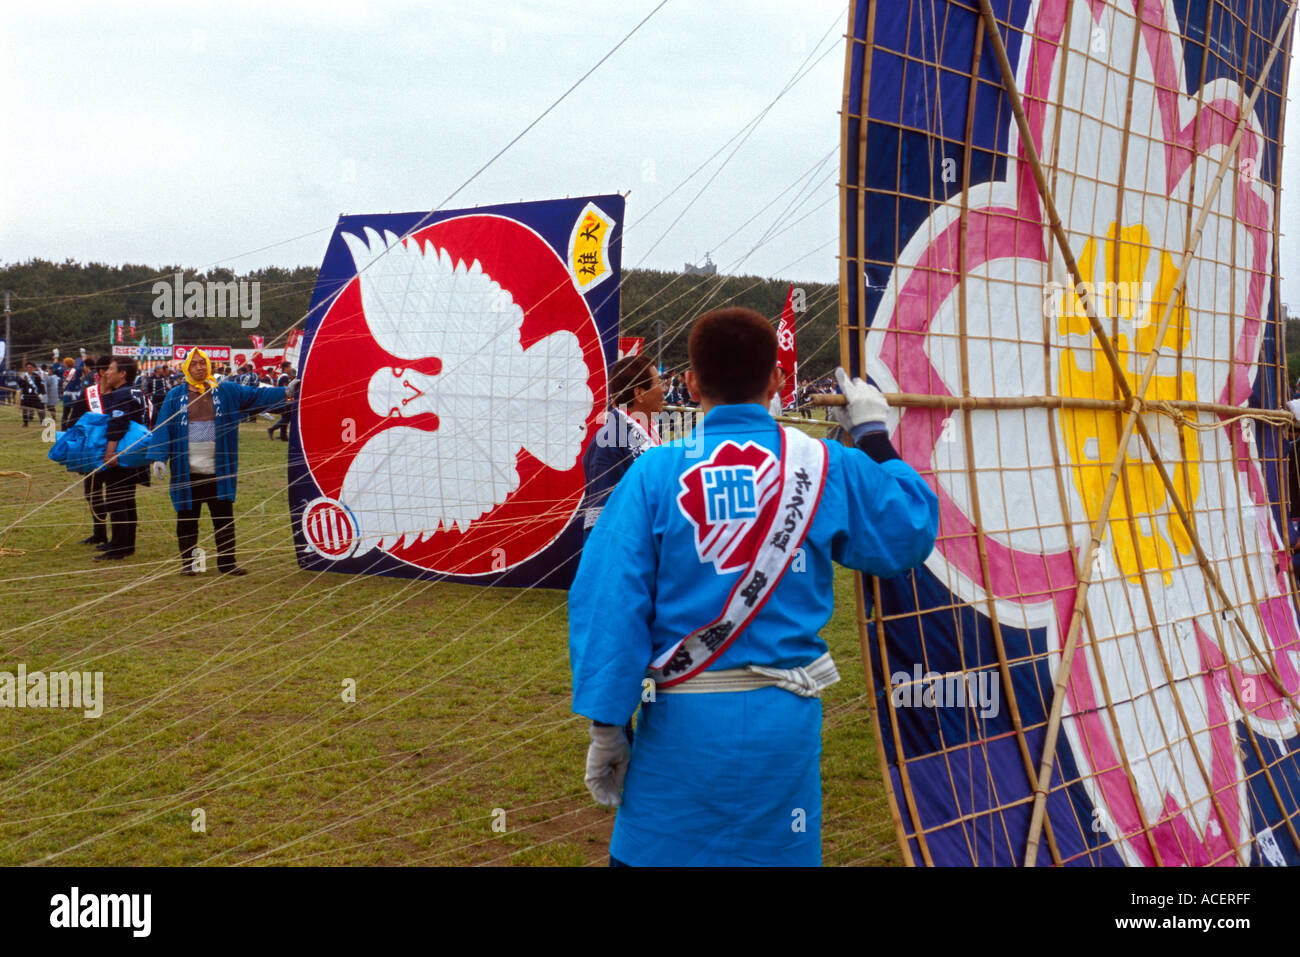 Team wearing costumes prepare their kite for flight and battle at Hamamatsu Giant Kite Festival Stock Photo